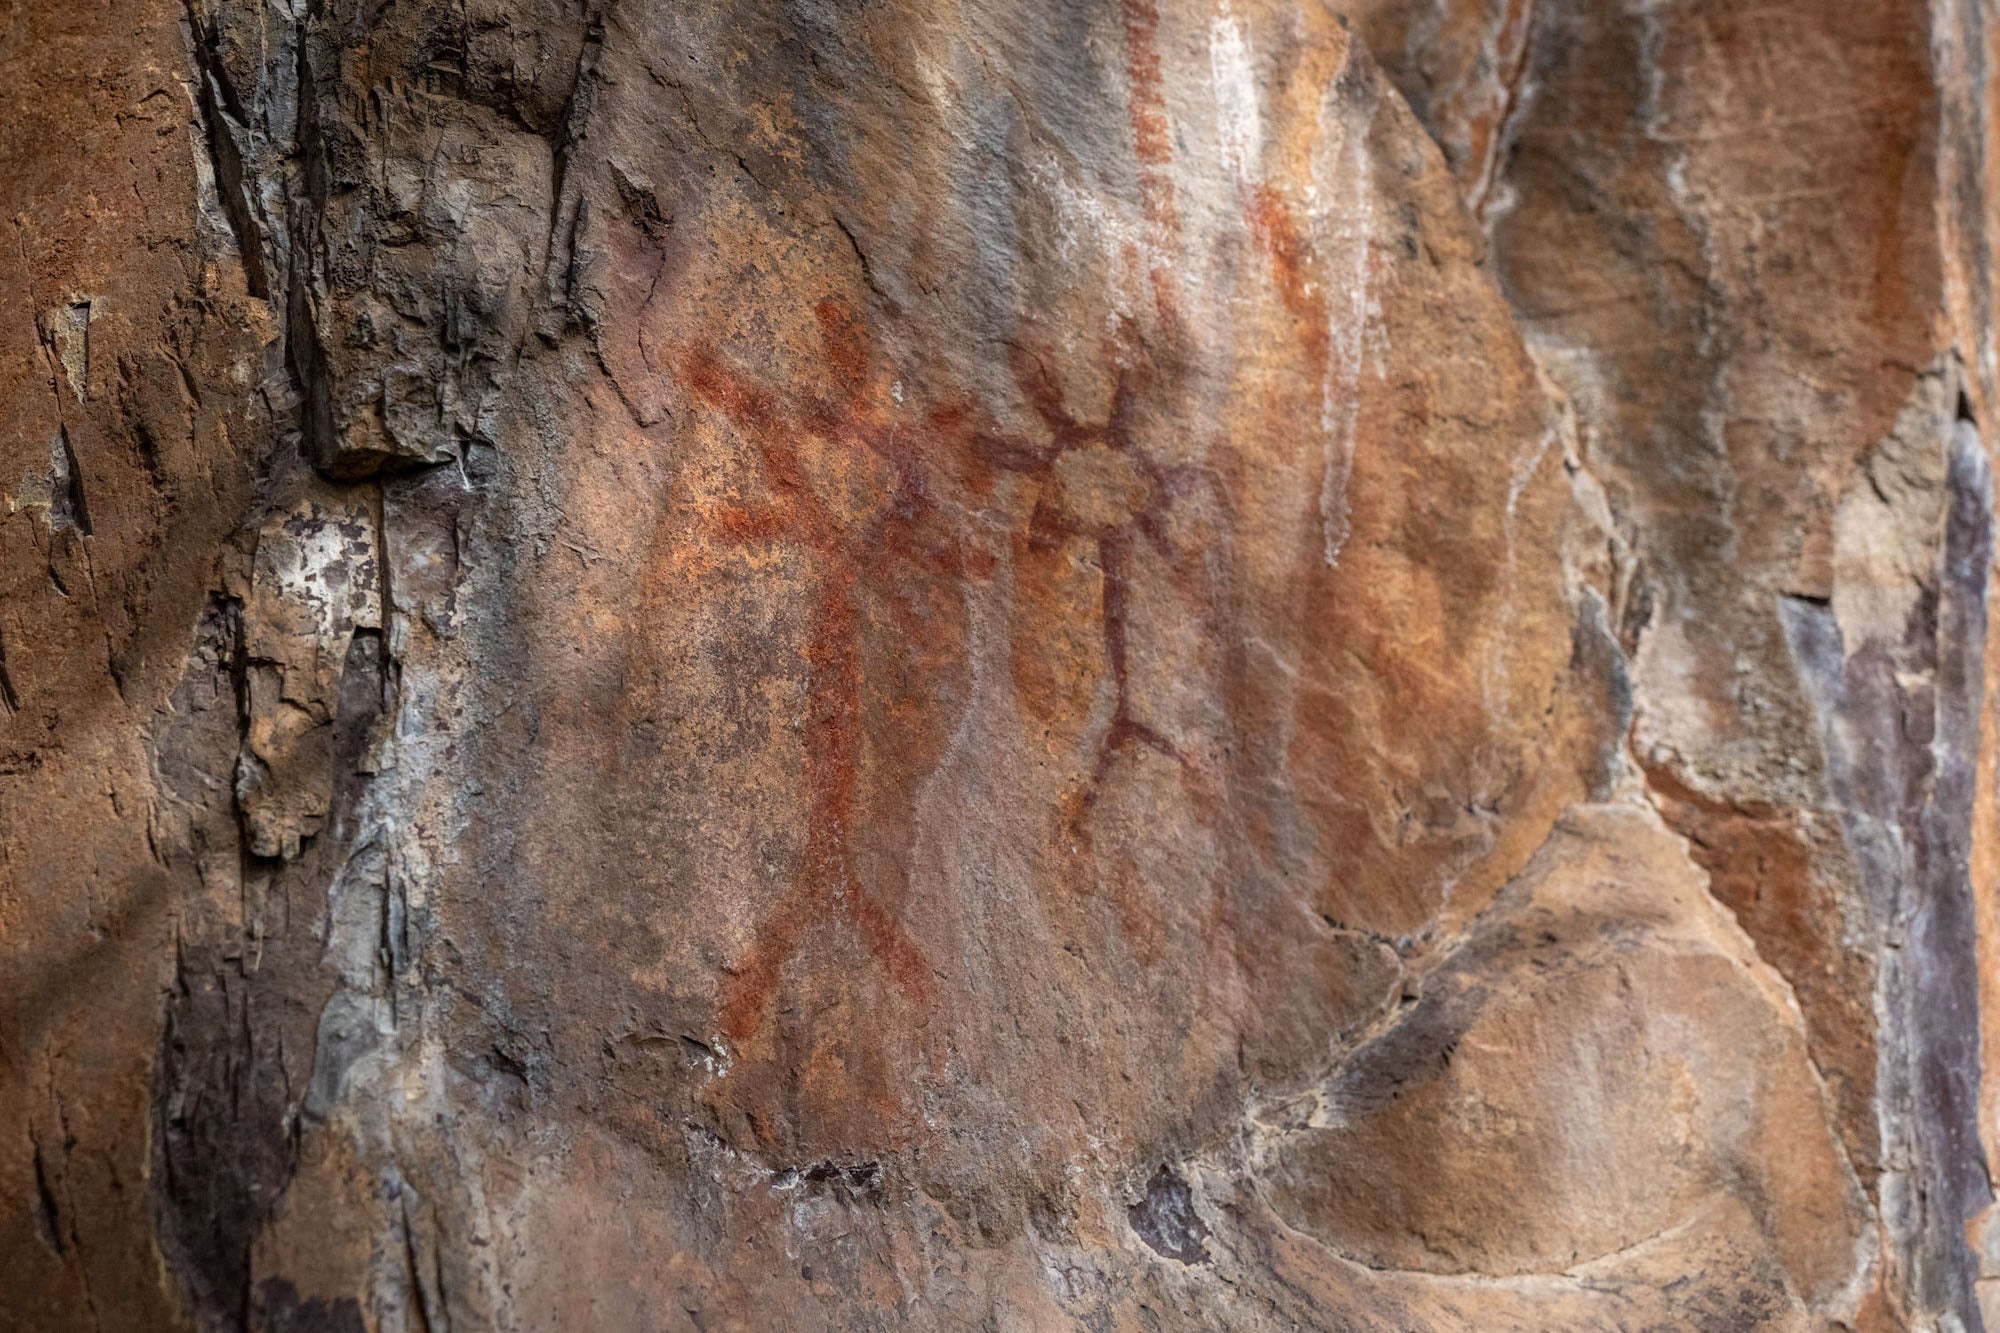 These pictographs can be found just upriver from the Cooper's Ferry Site.